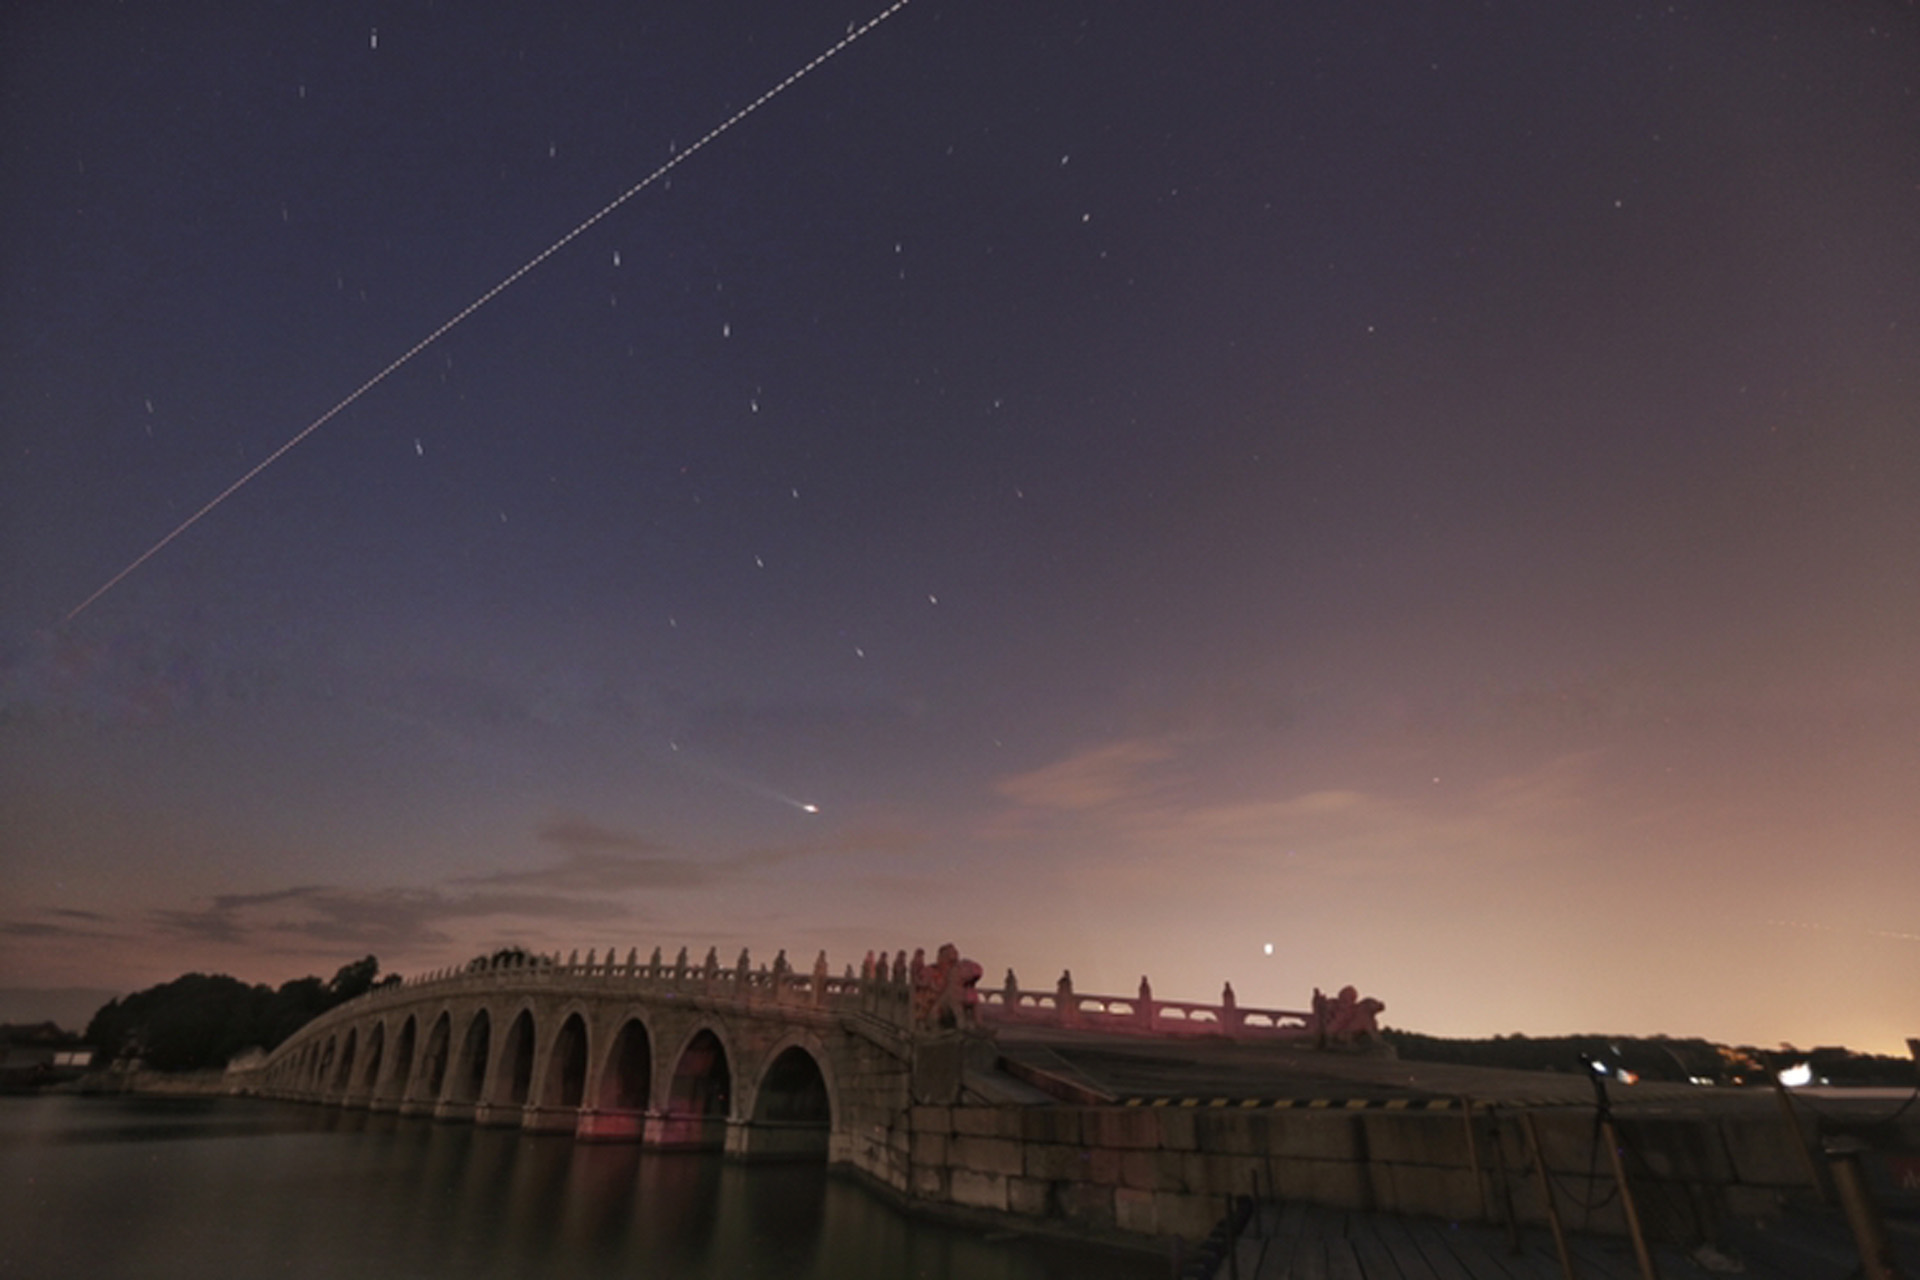 China's space station flies across the sky above the Seventeen-Arch Bridge at the Summer Palace in Beijing, September 1, 2021. /Deng Zhong